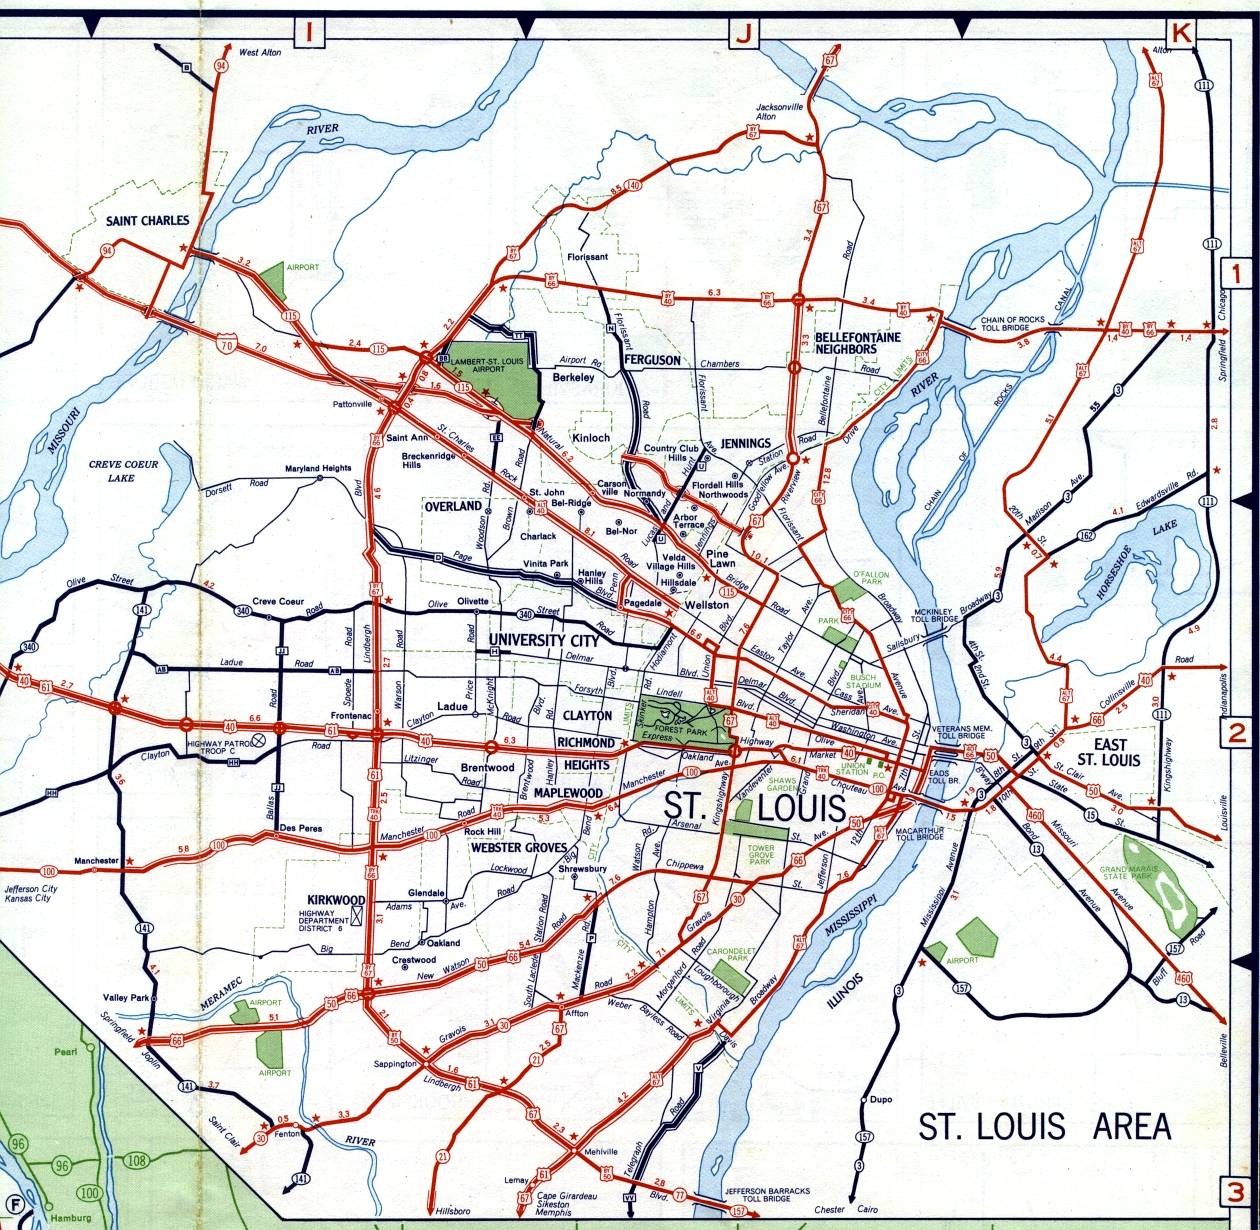 Inset map for St. Louis, Mo. (1959)